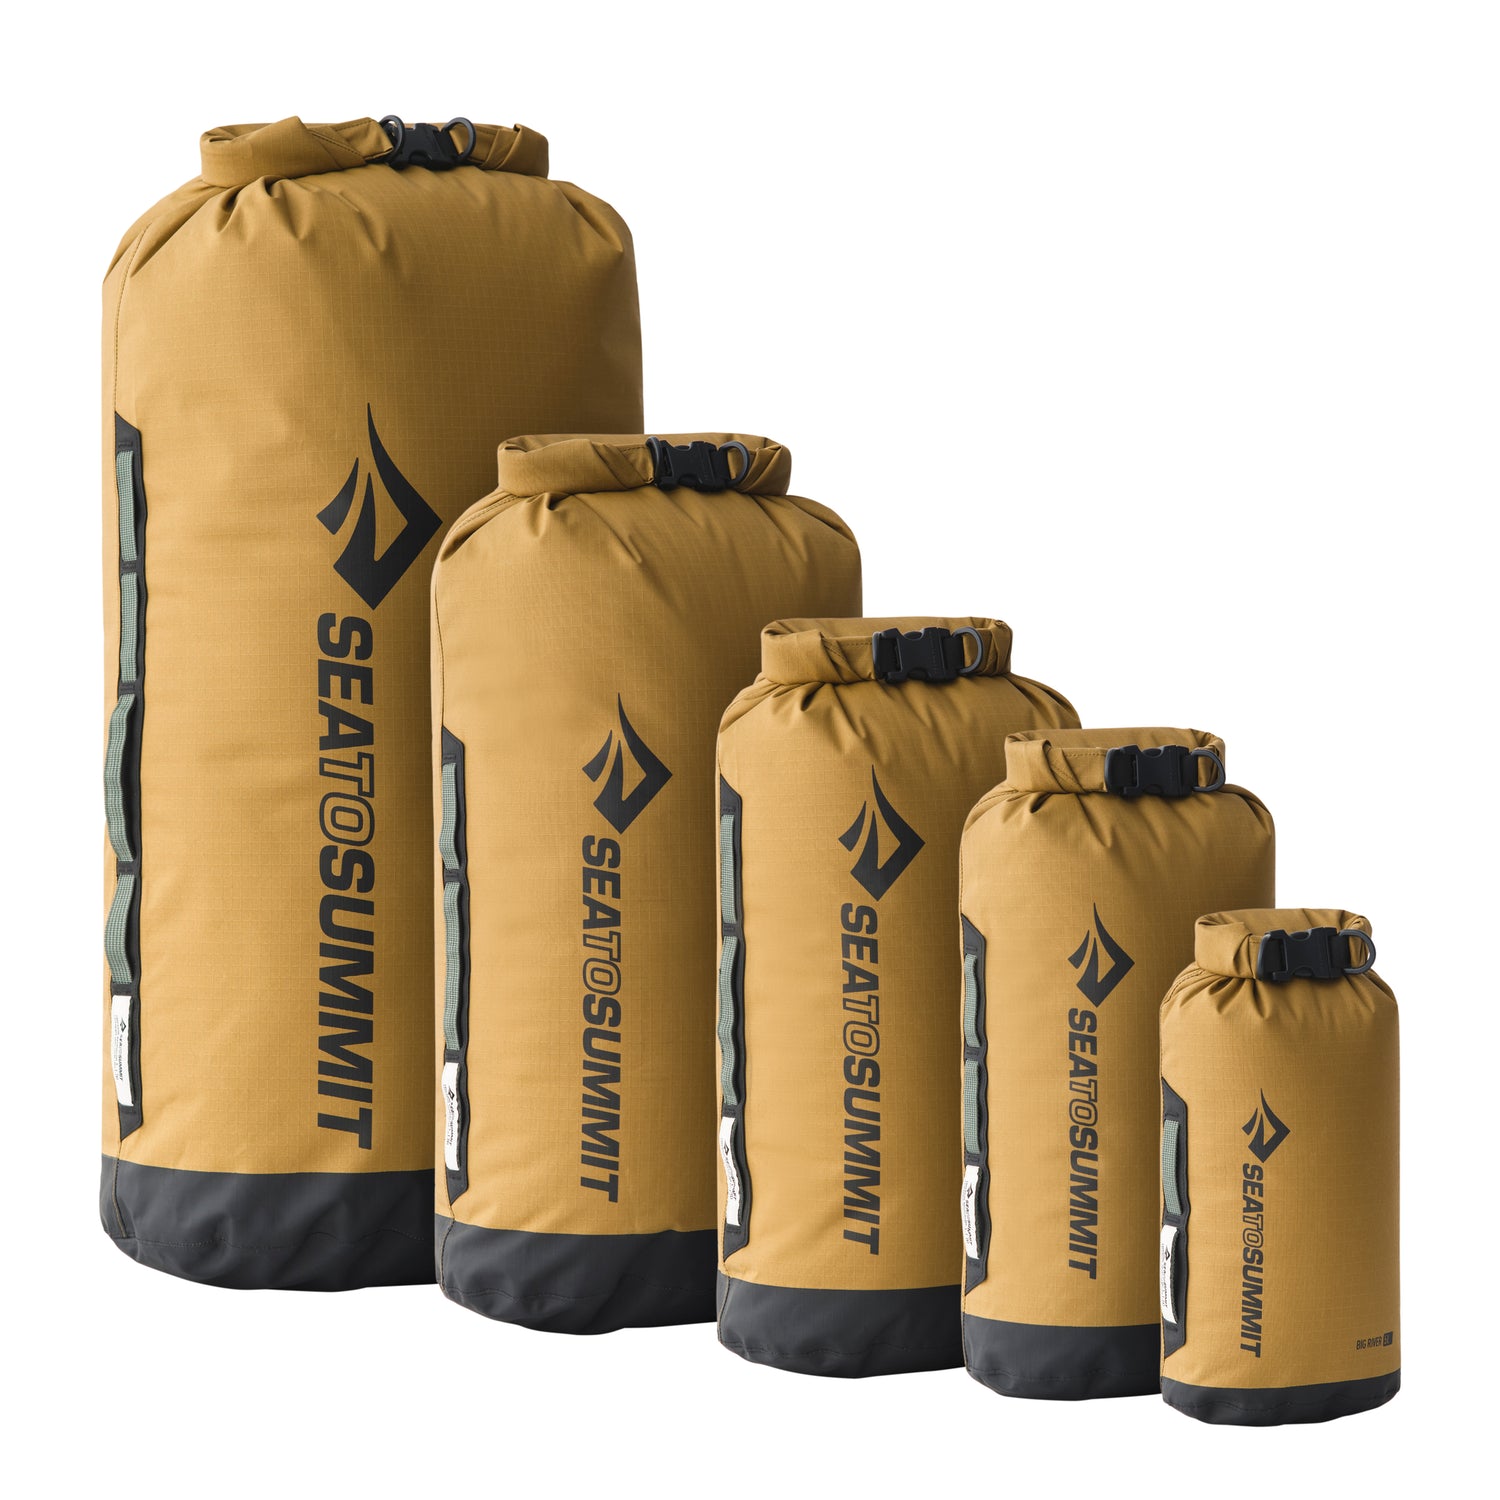 Big River Dry Bag for your Adventure – Sea to Summit